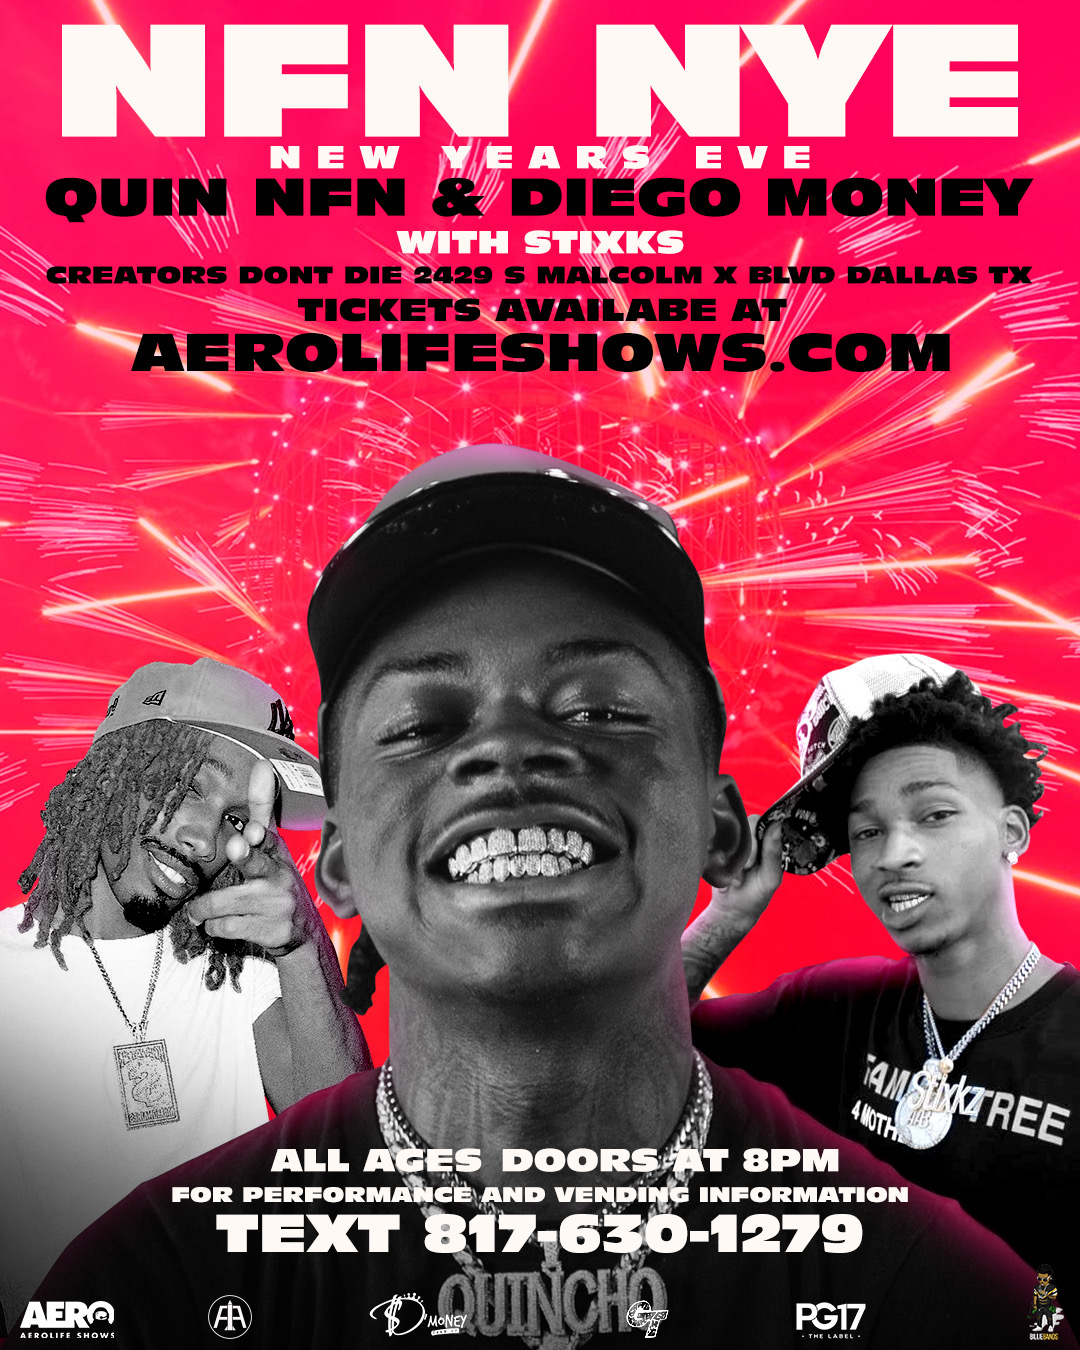 DEC 31st NFN NYE! QUIN NFN and Diego Money in Dallas! image pic